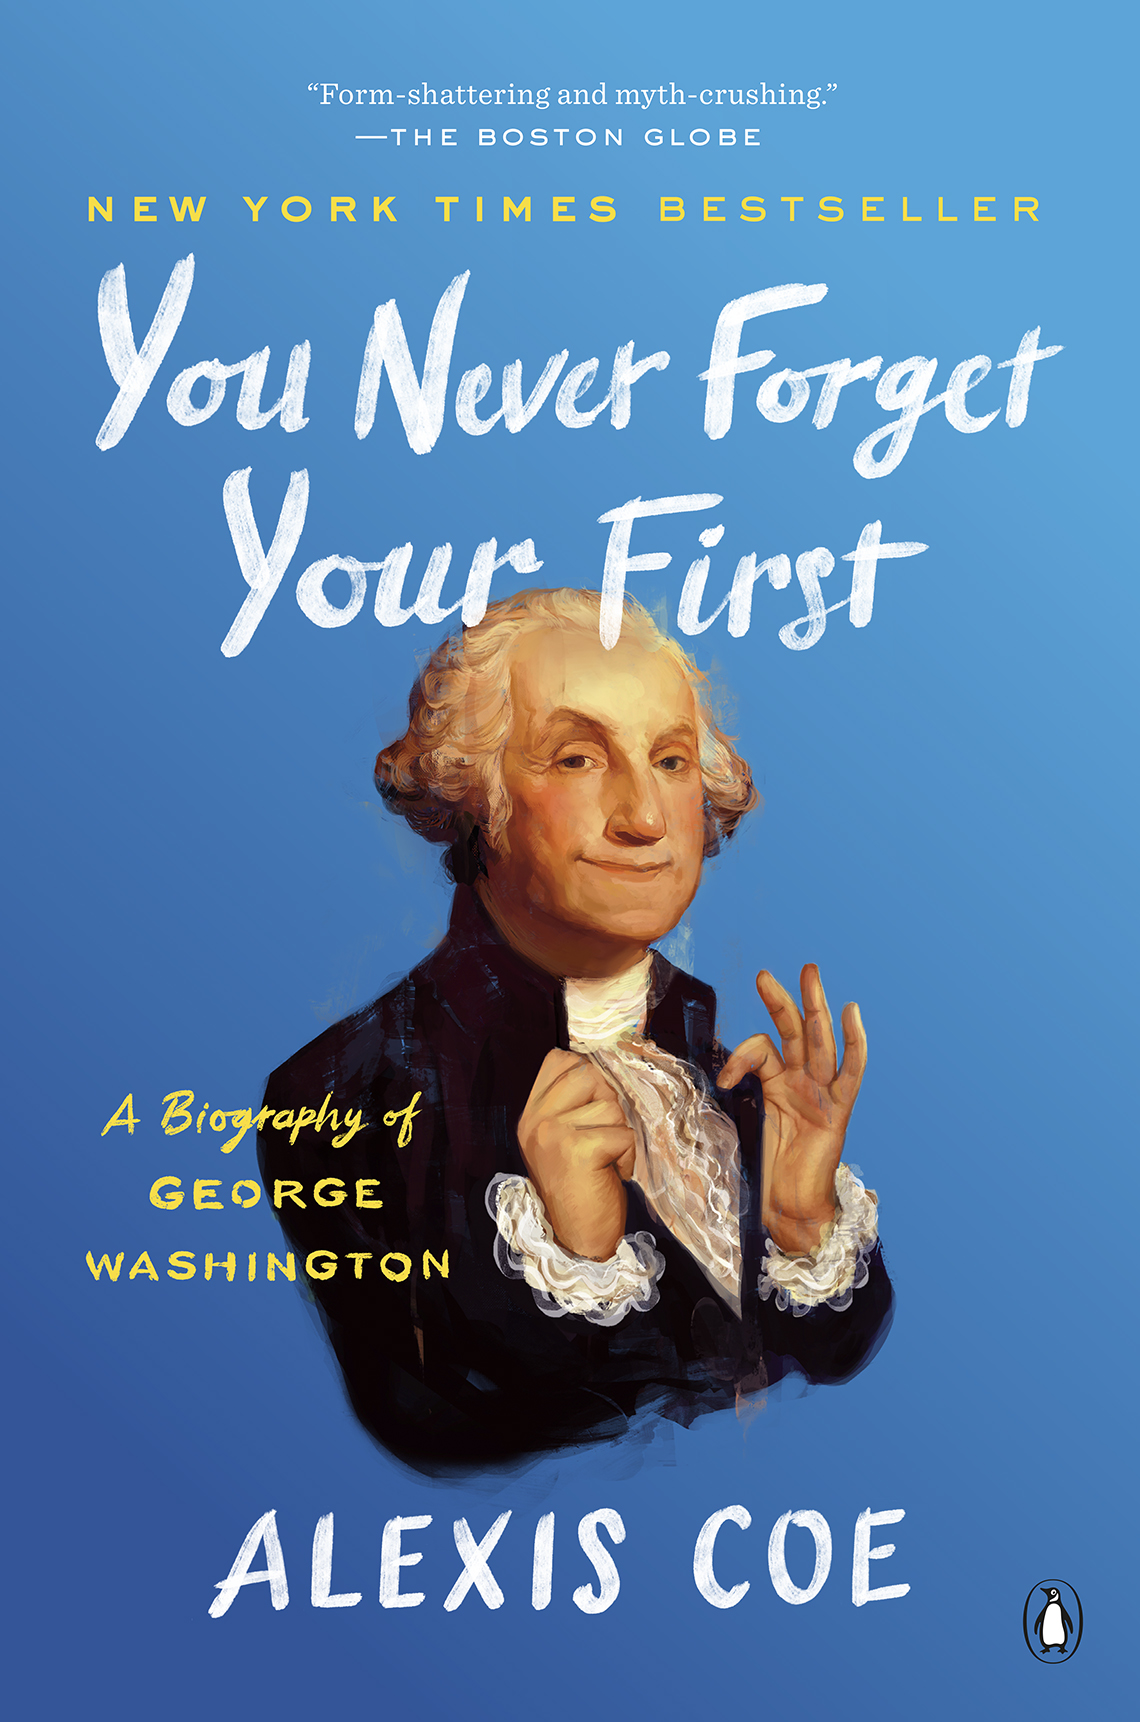 You Never Forget Your First; A Biography of George Washington, por Alexis Coe.